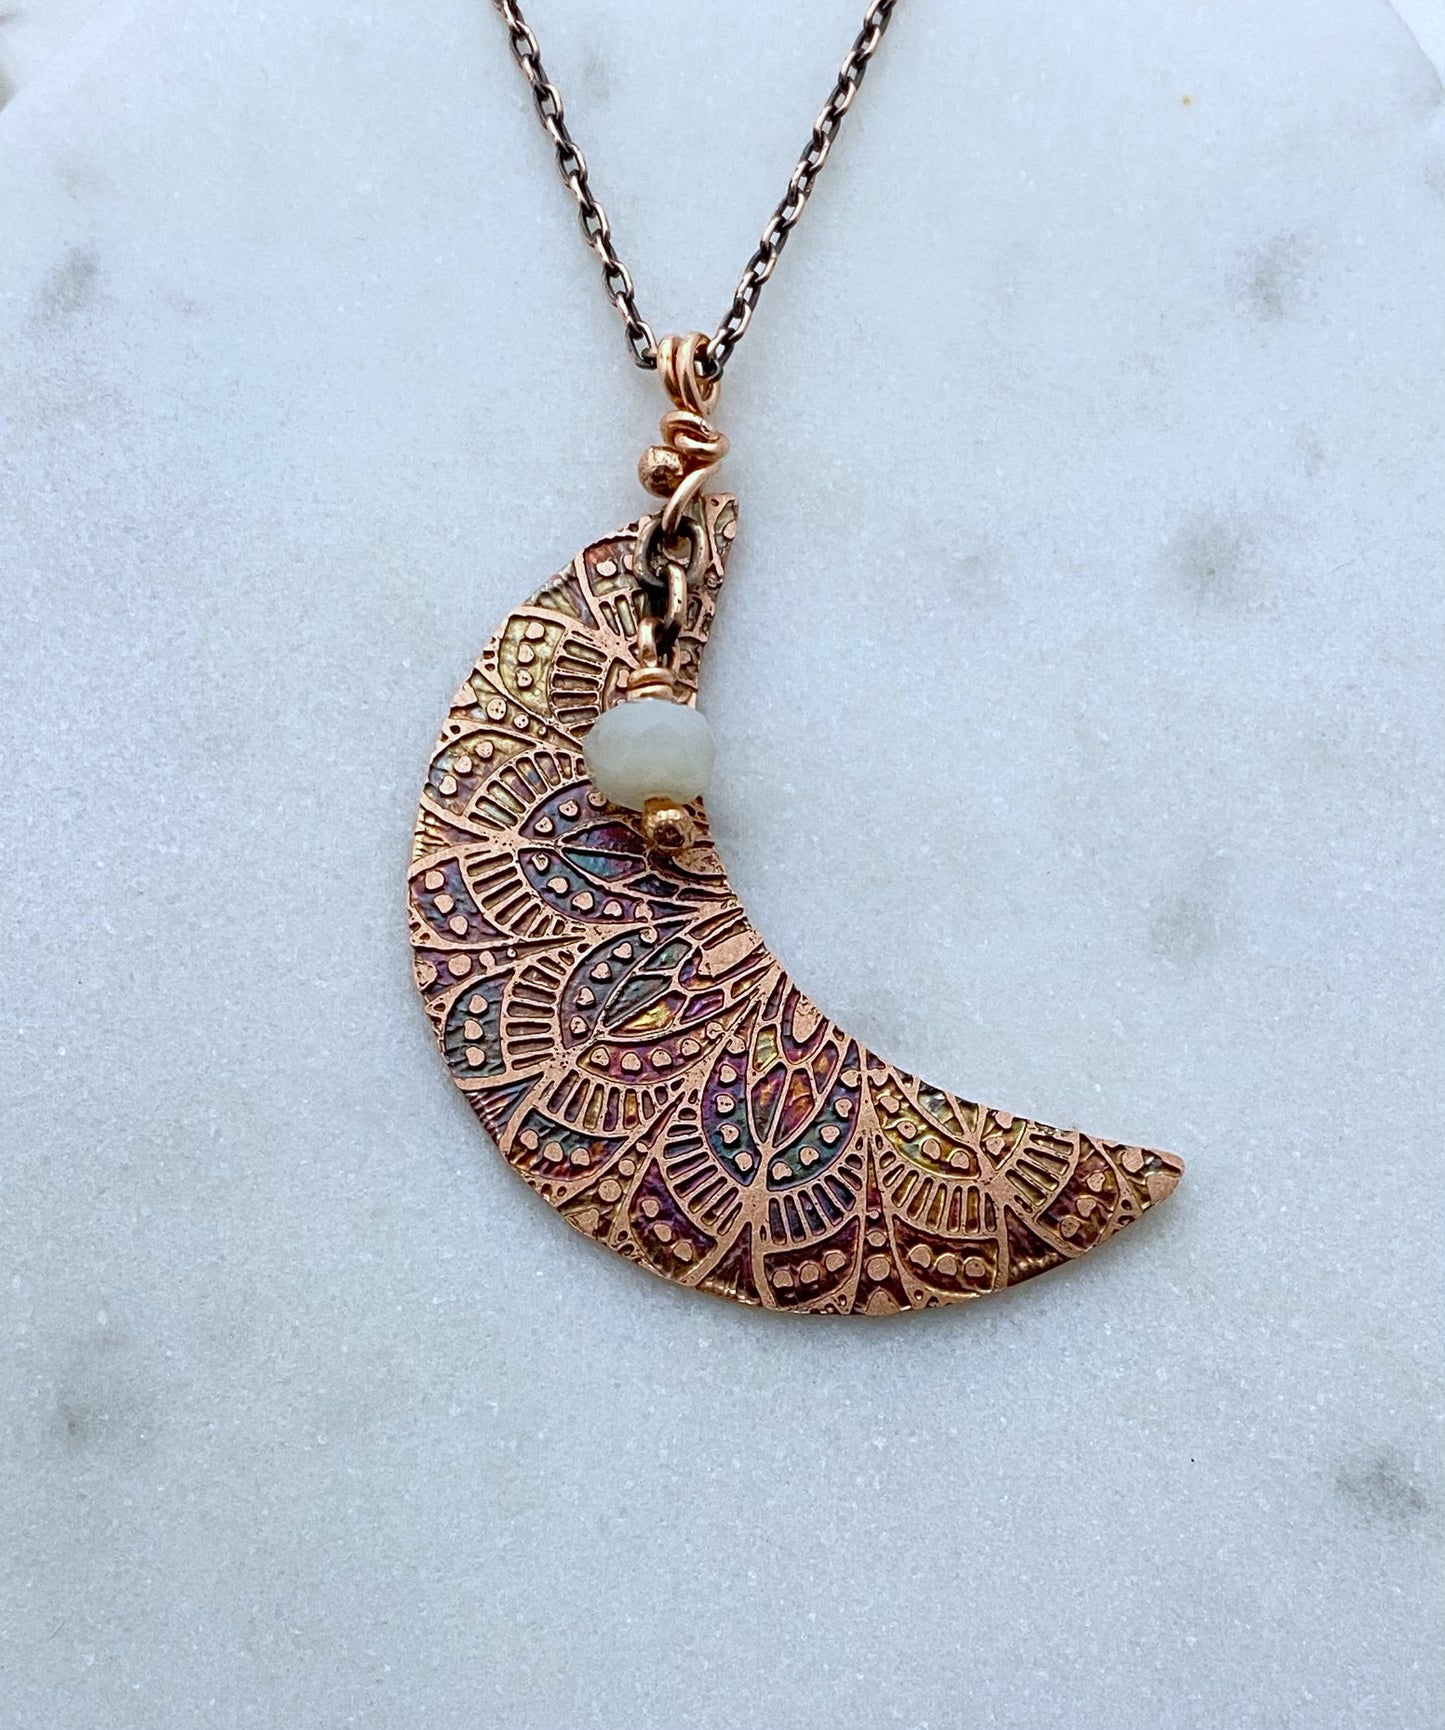 Crescent moon acid etched copper necklace with a moonstone gemstone